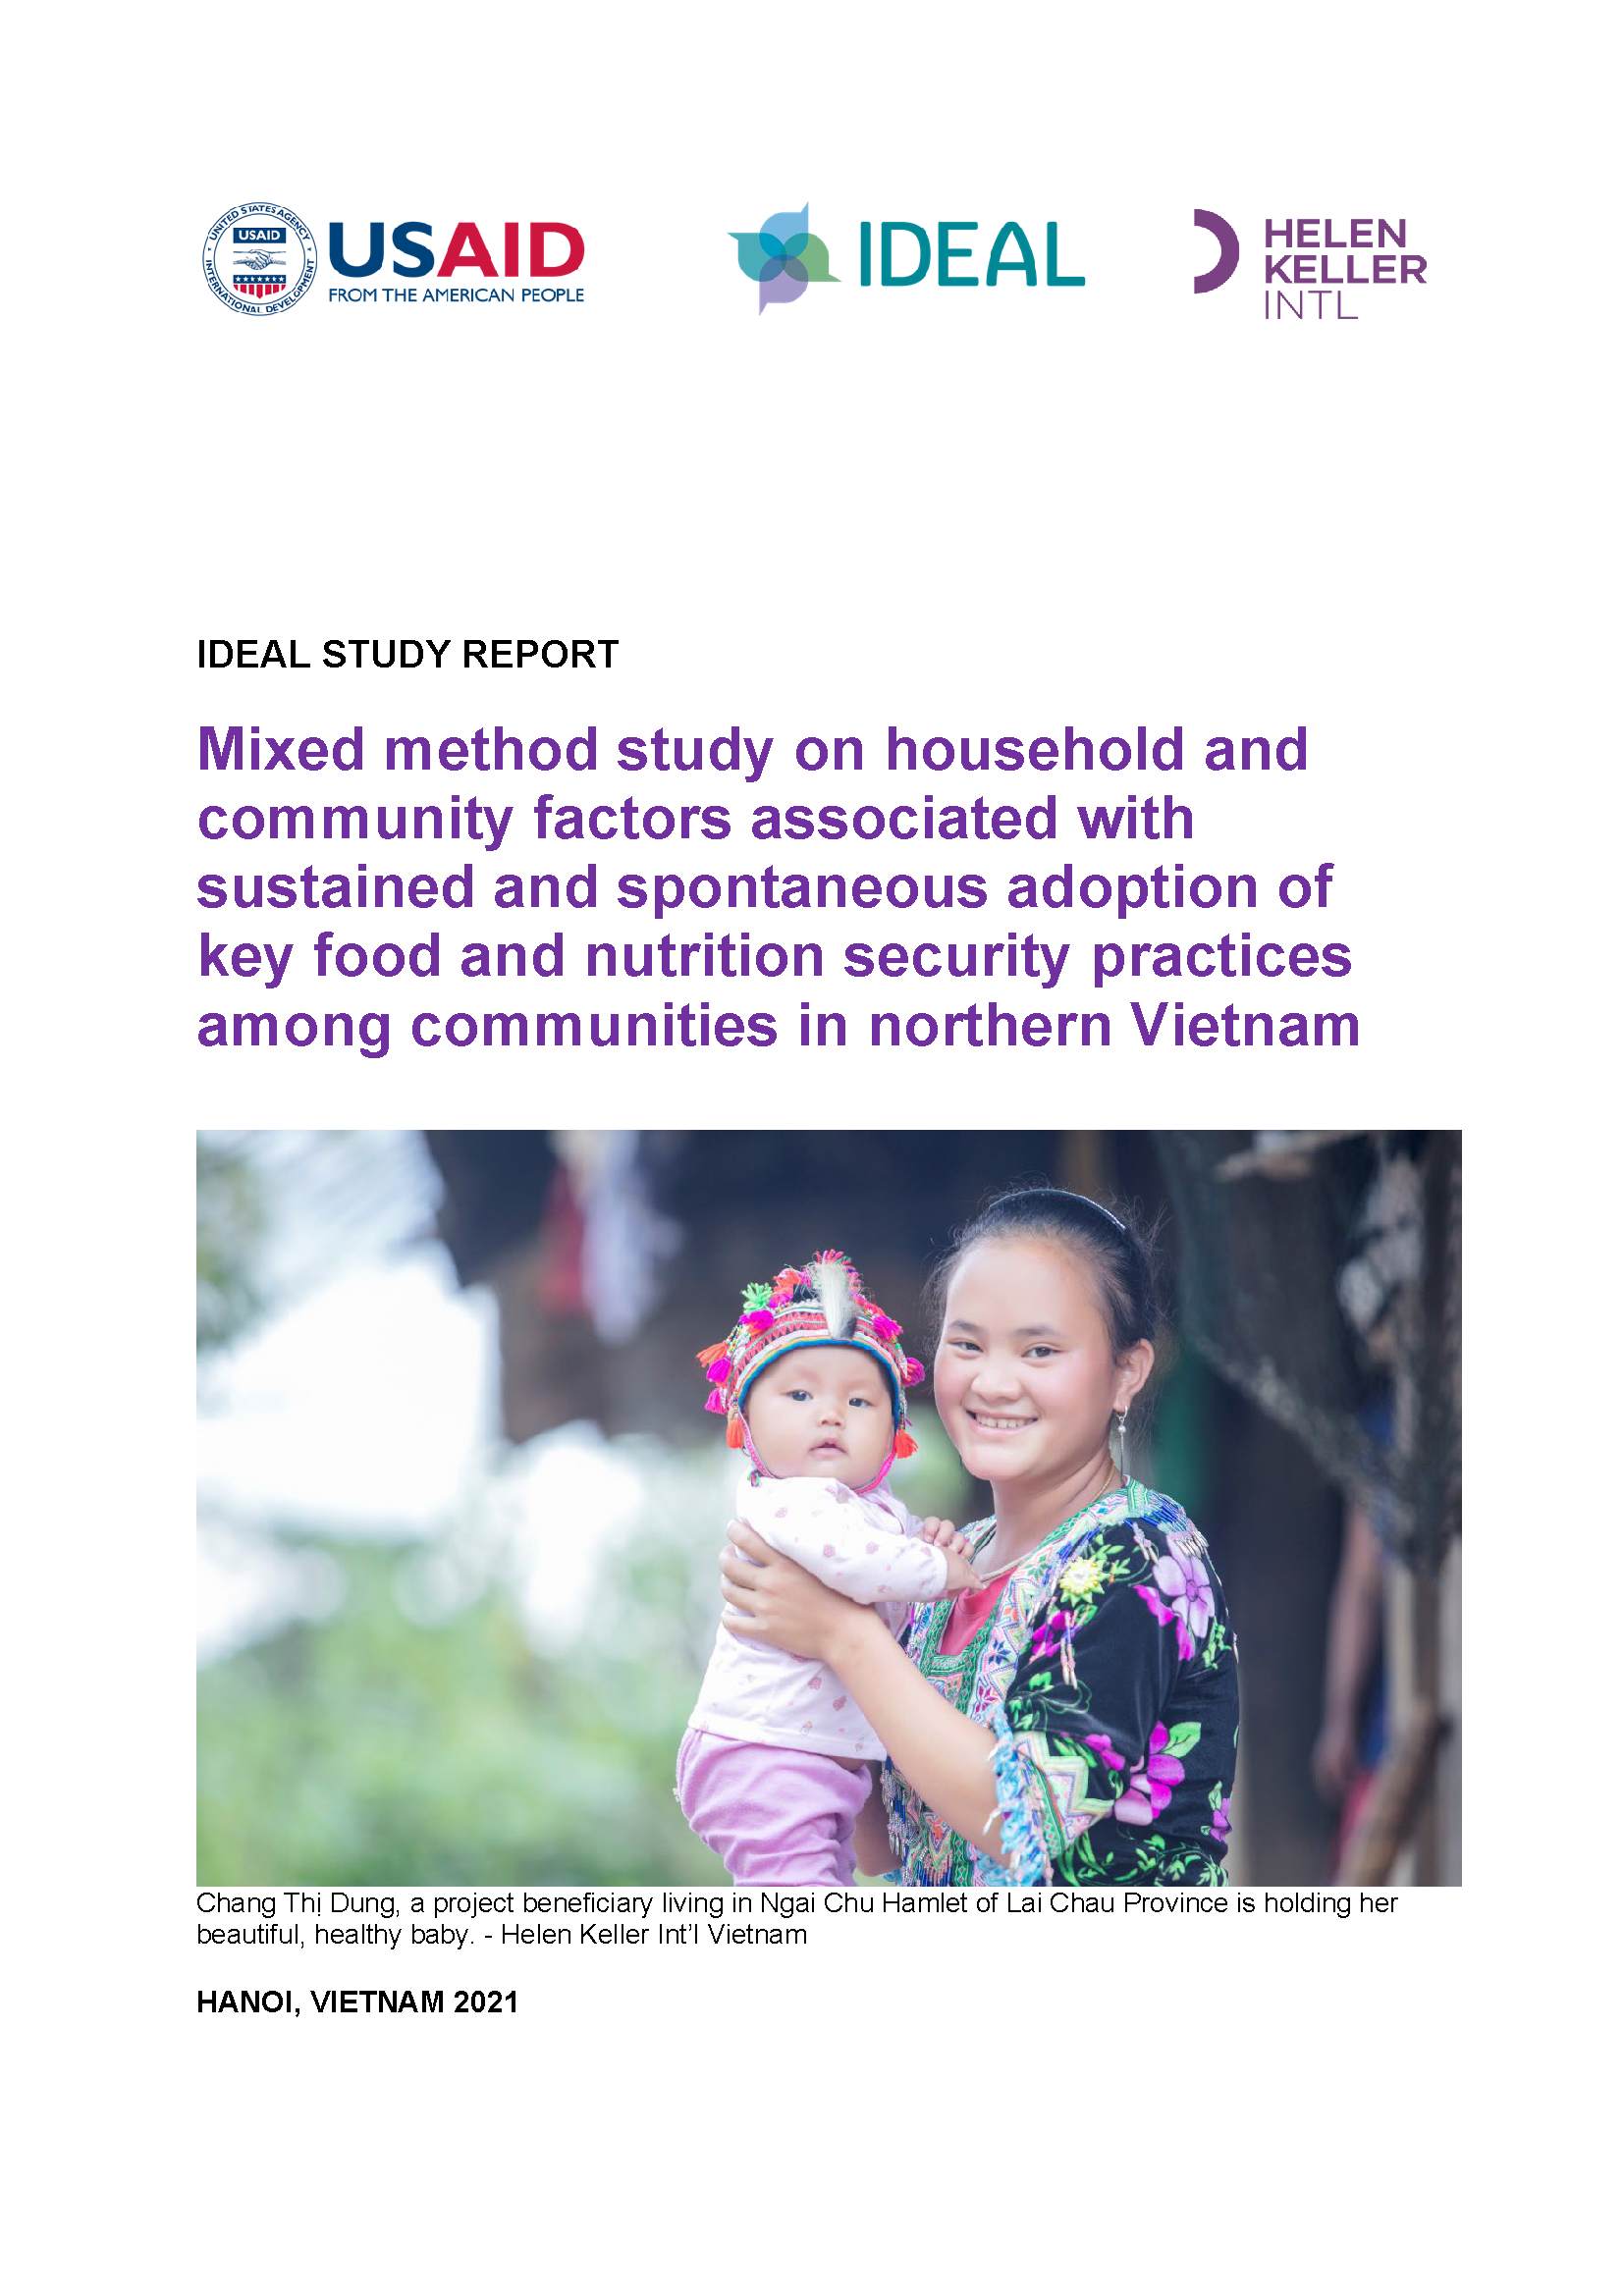 Cover page for Mixed Method Study on Household and Community Factors Associated with Sustained and Spontaneous Adoption of Key Food and Nutrition Security Practices Among Communities in Northern Vietnam